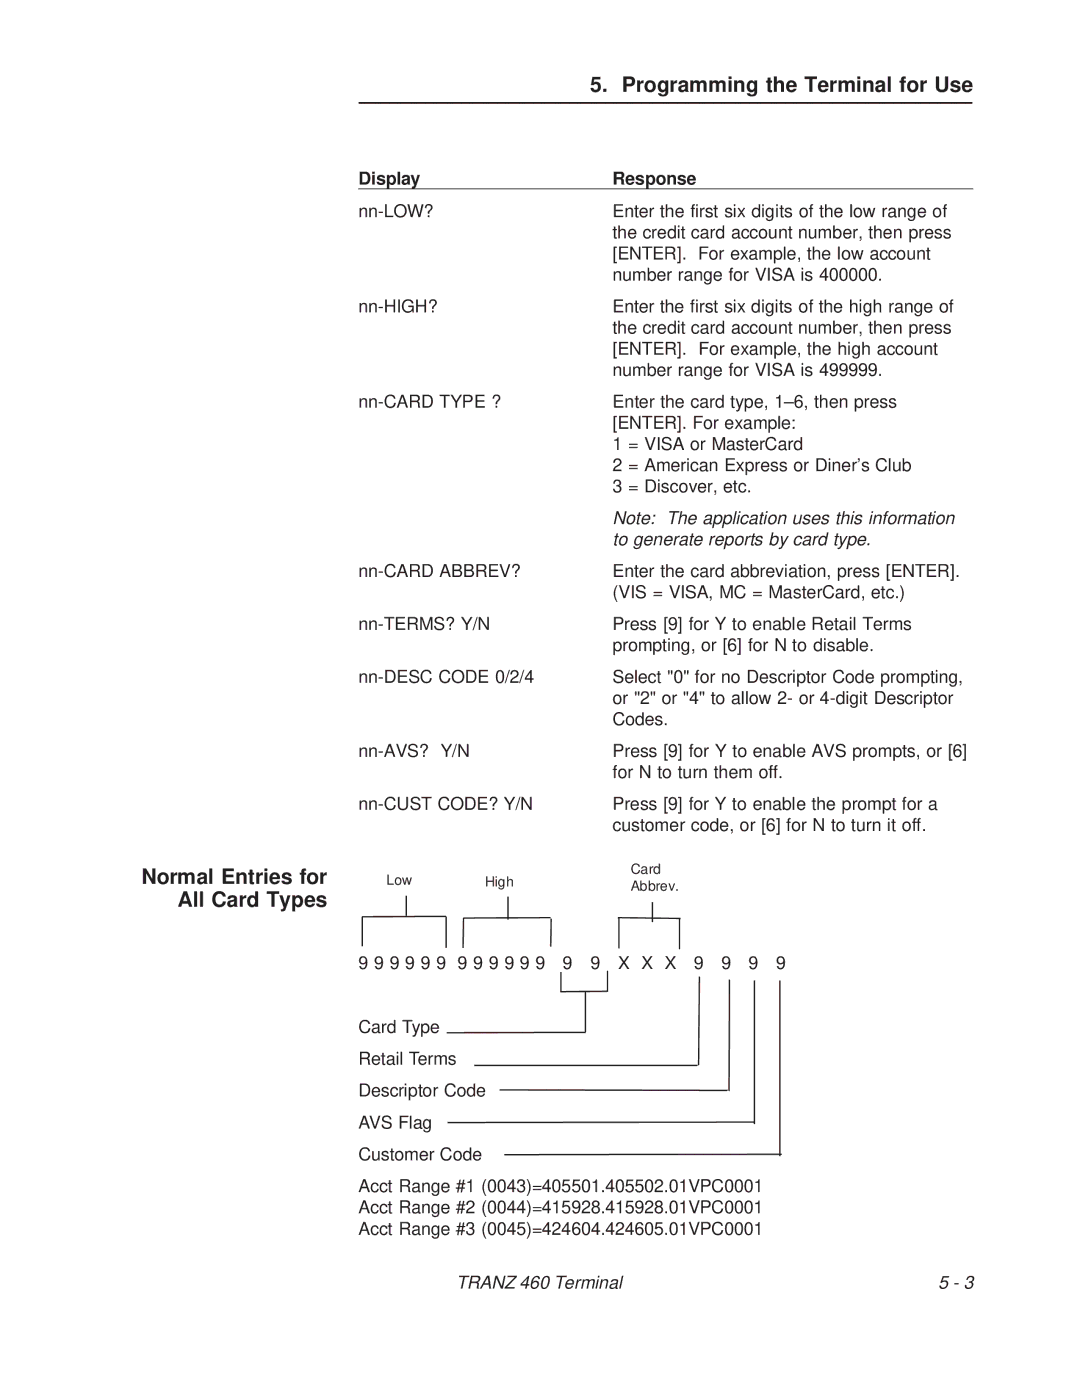 VeriFone TRANZ 460 manual To generate reports by card type 